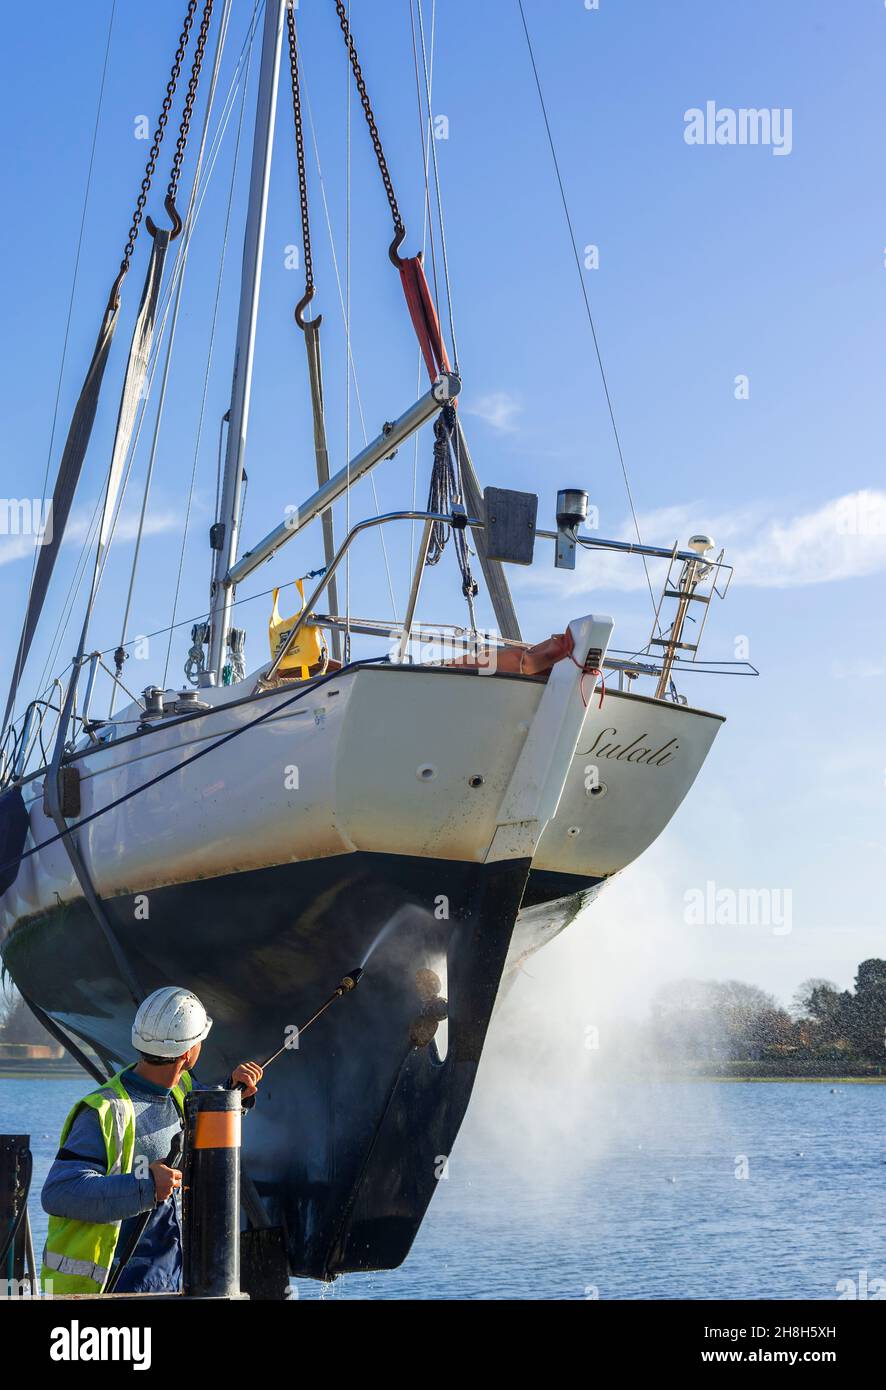 Craned out yacht, Contessa 26,in slings, the hull being pressure washed to remove weed at Bosham Quay, Chichester Harbour, West Sussex, England, UK Stock Photo